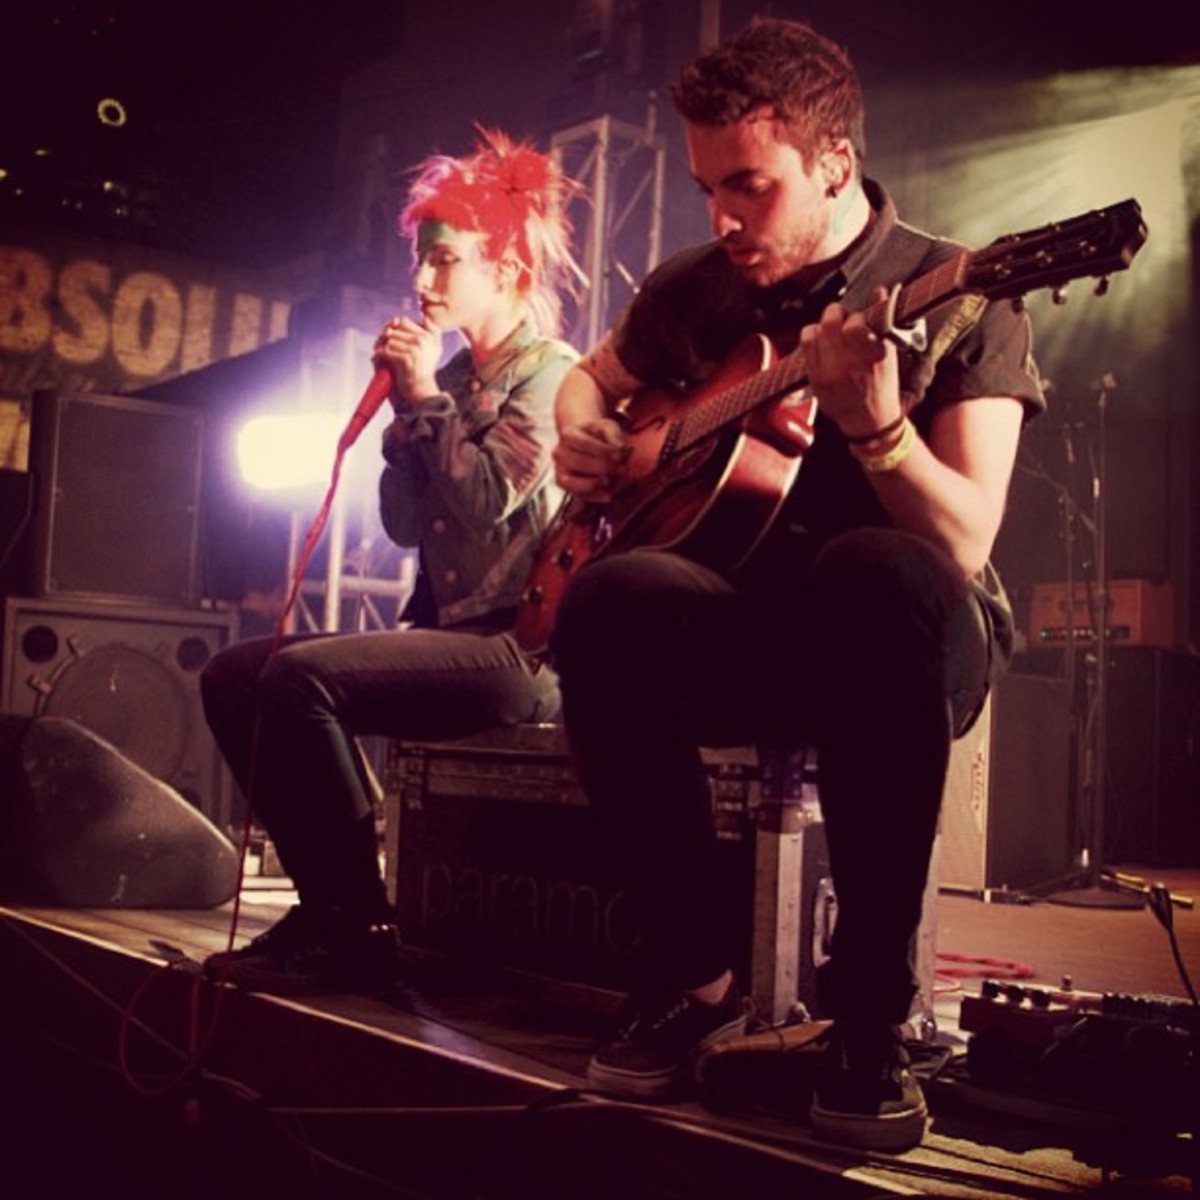 Hayley Williams & Taylor York of Paramore performing at SXSW (South By SouthWest) in 2013.